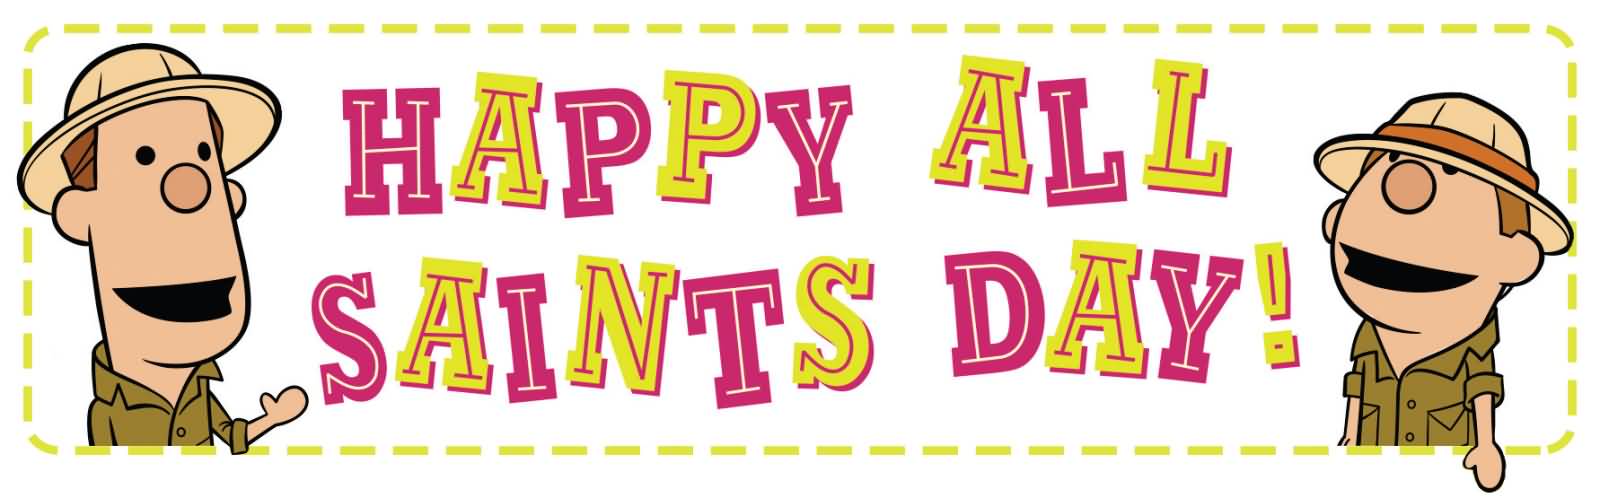 Happy All Saints Day Clipart Header Image